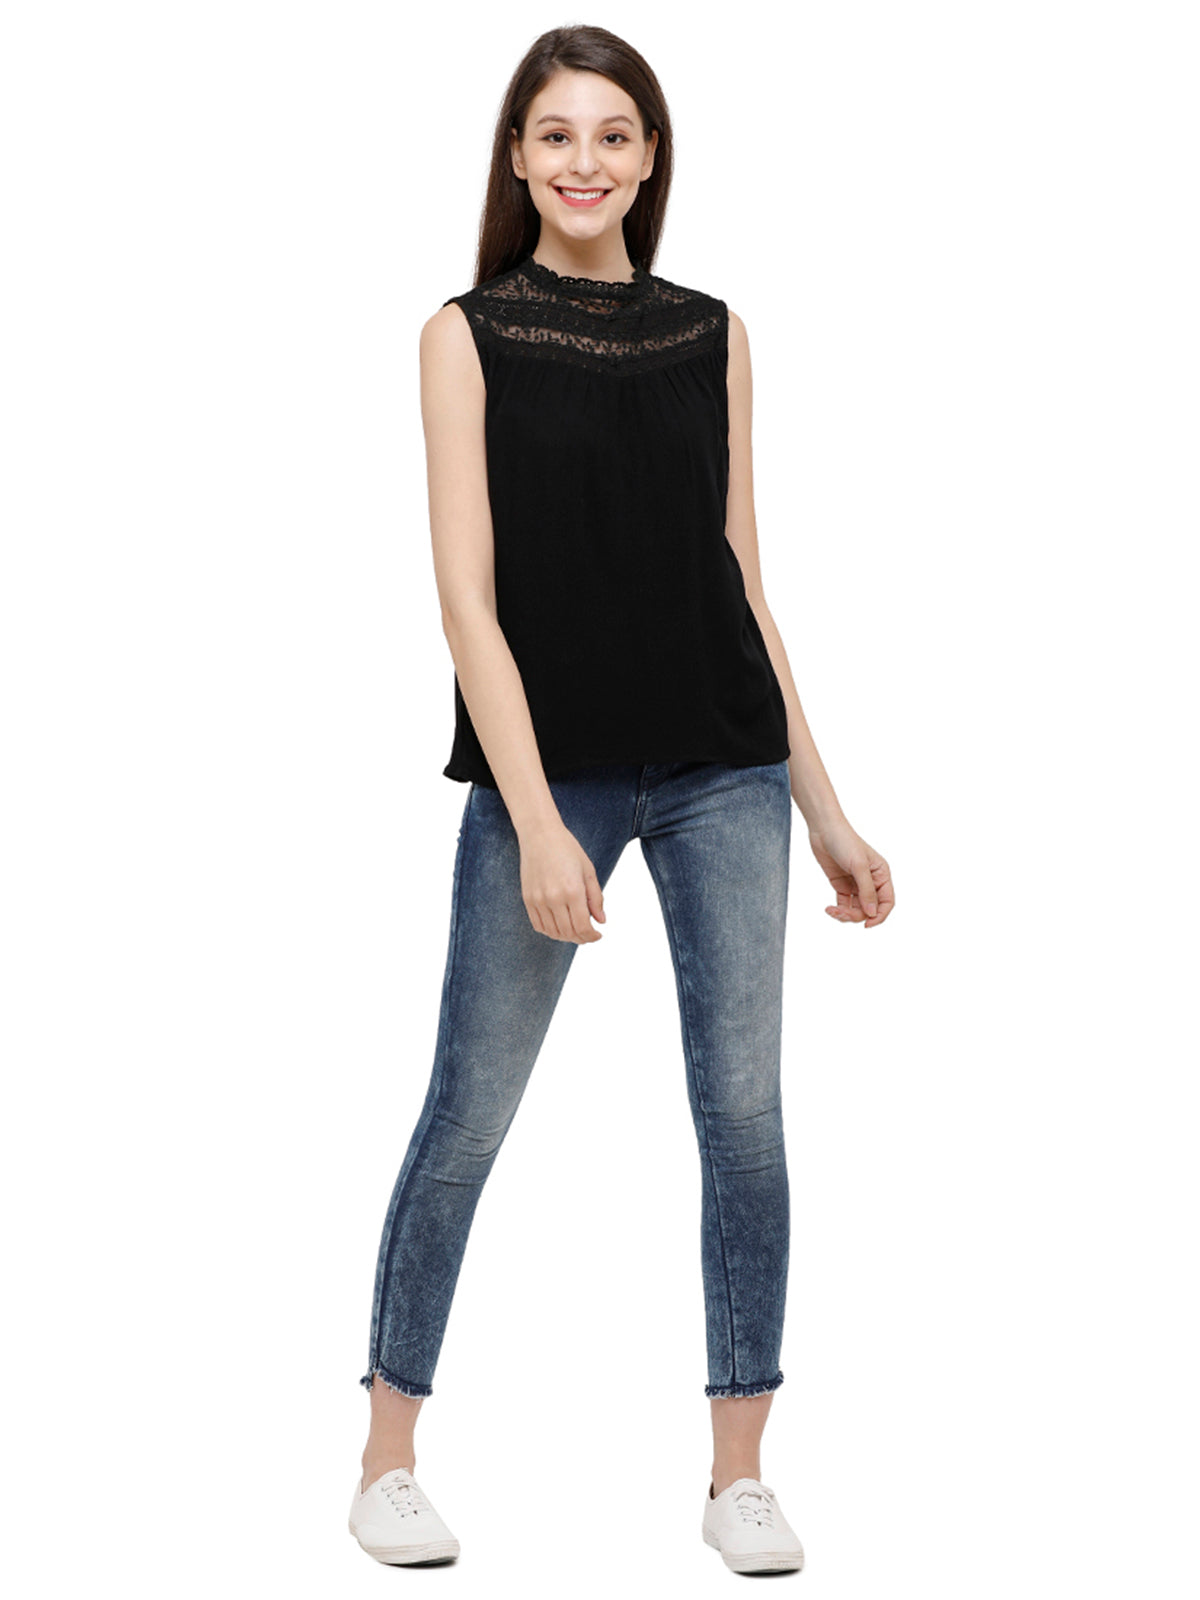 Identiti Women Fashion Top With Lace Detail At Front & Back Yoke